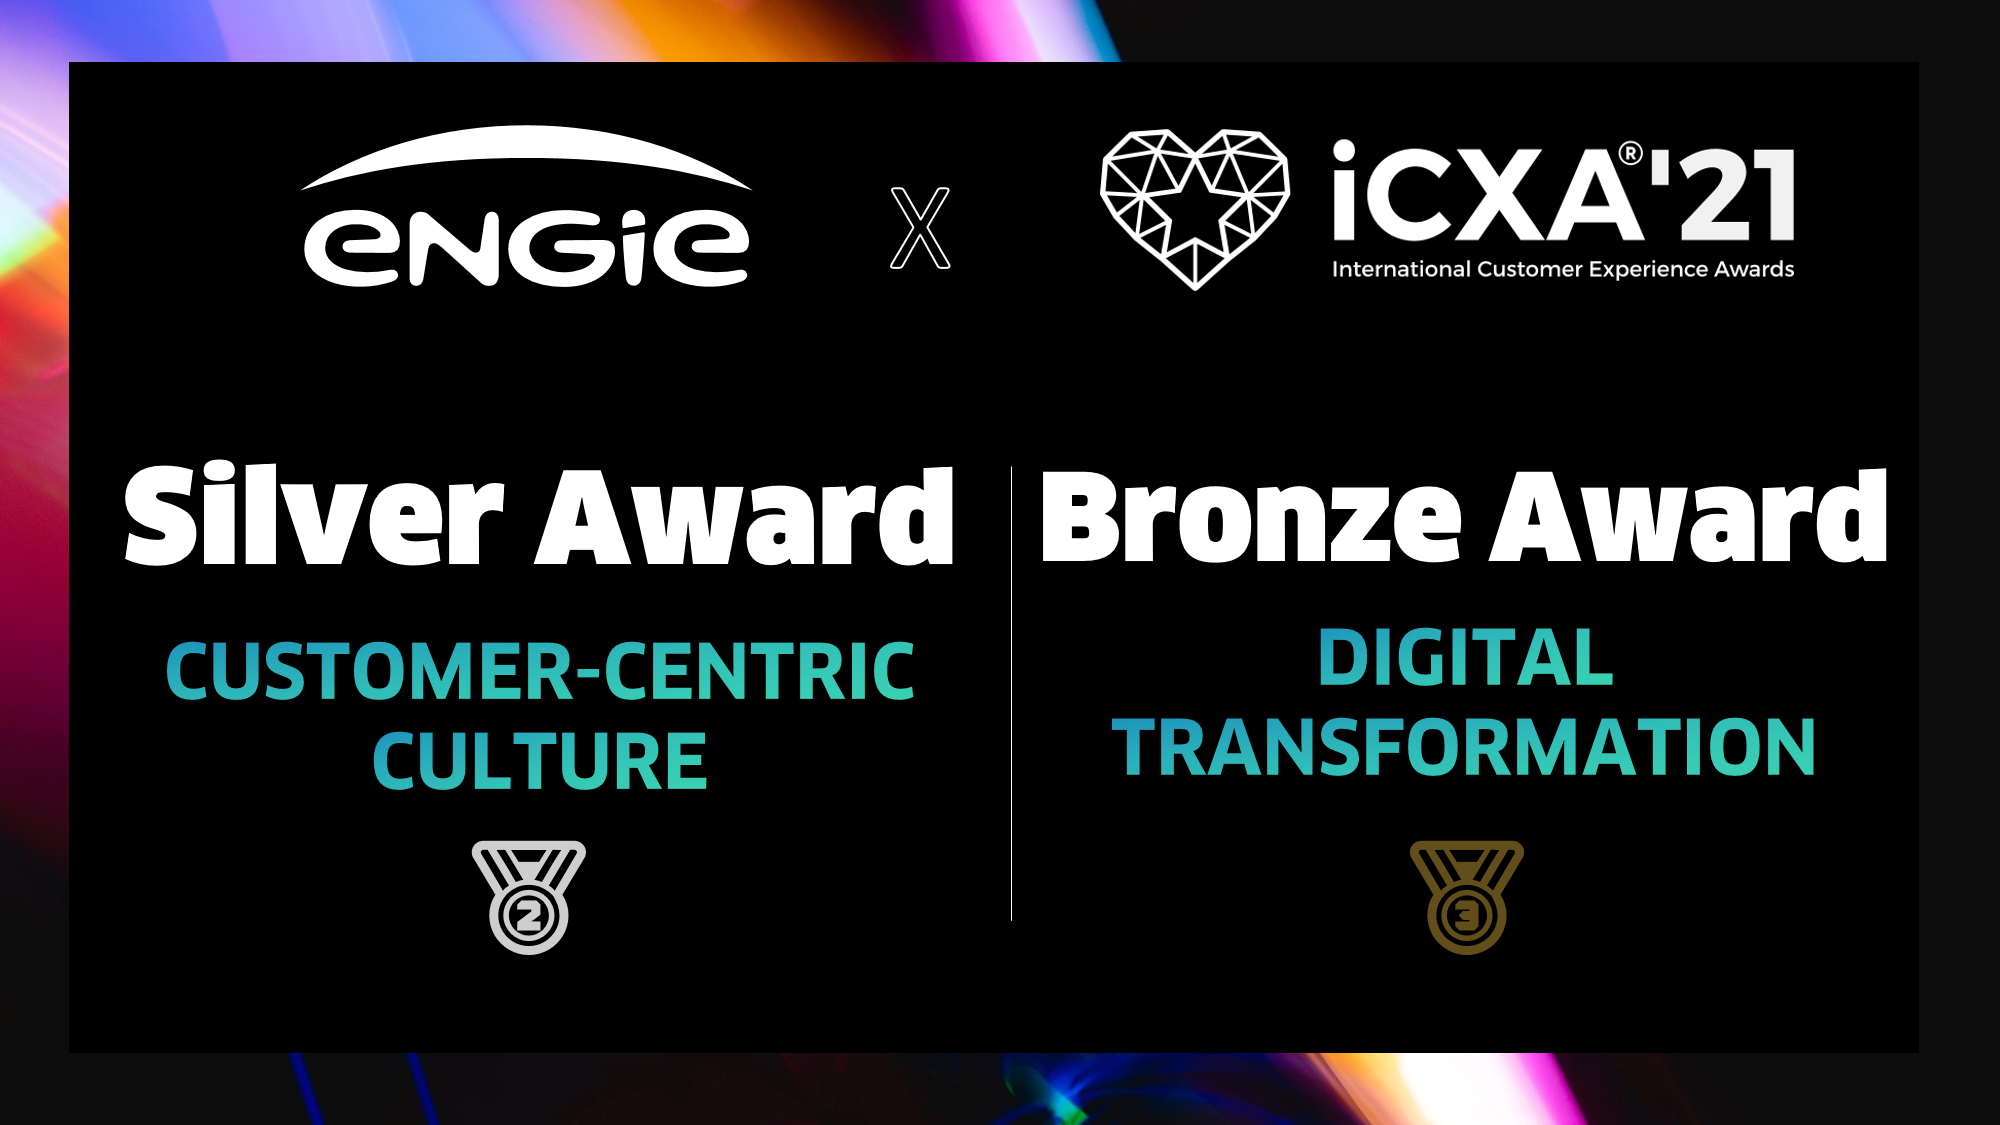 ENGIE Global Energy Management wins two awards at ICXA